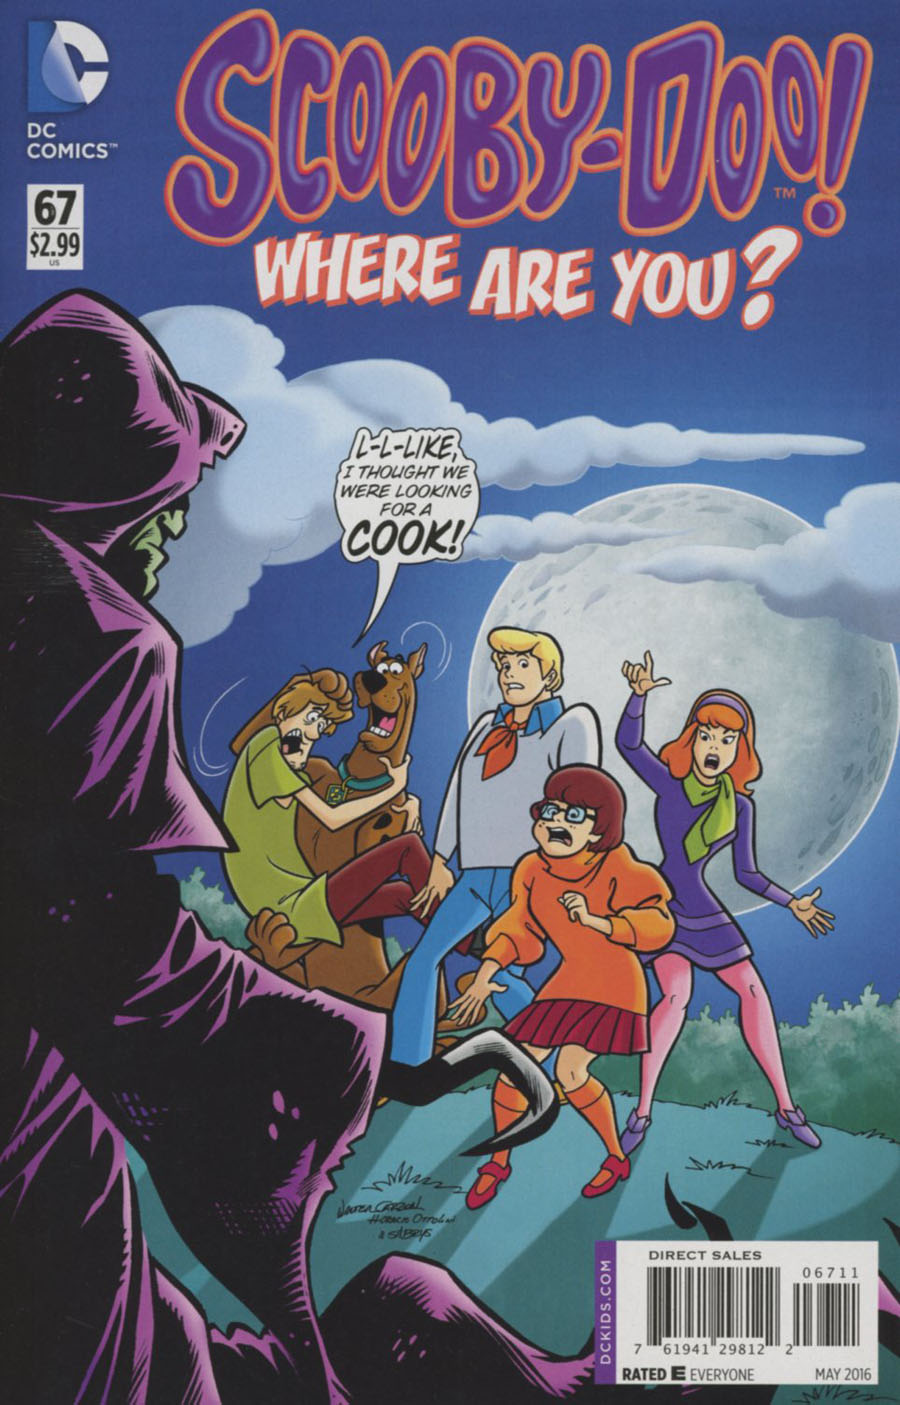 Scooby-Doo Where Are You #67